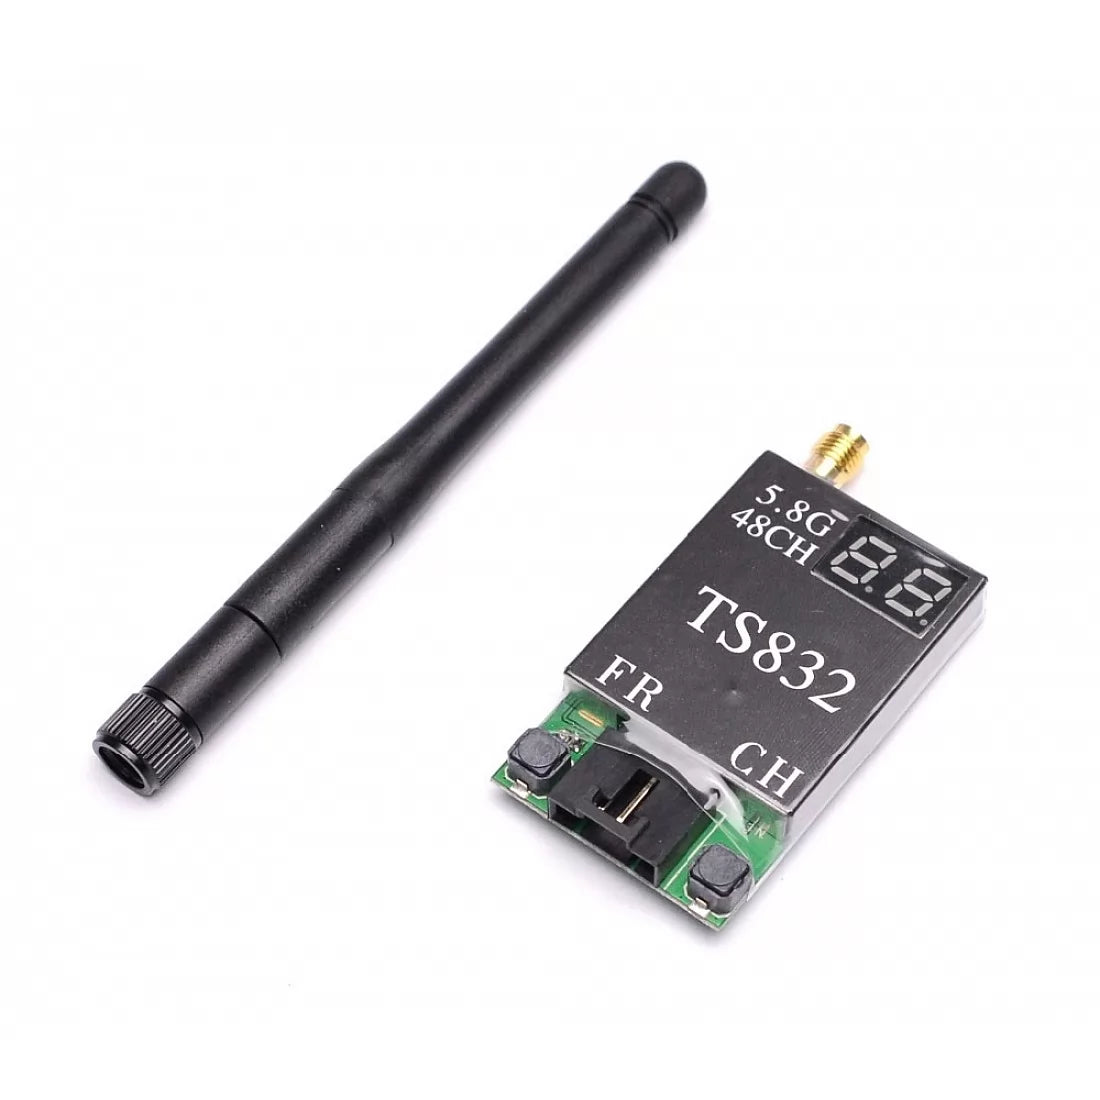 TS832 FPV 5.8G 600MW 48CH Wireless Audio Video Transmitter For Drone (Premium)